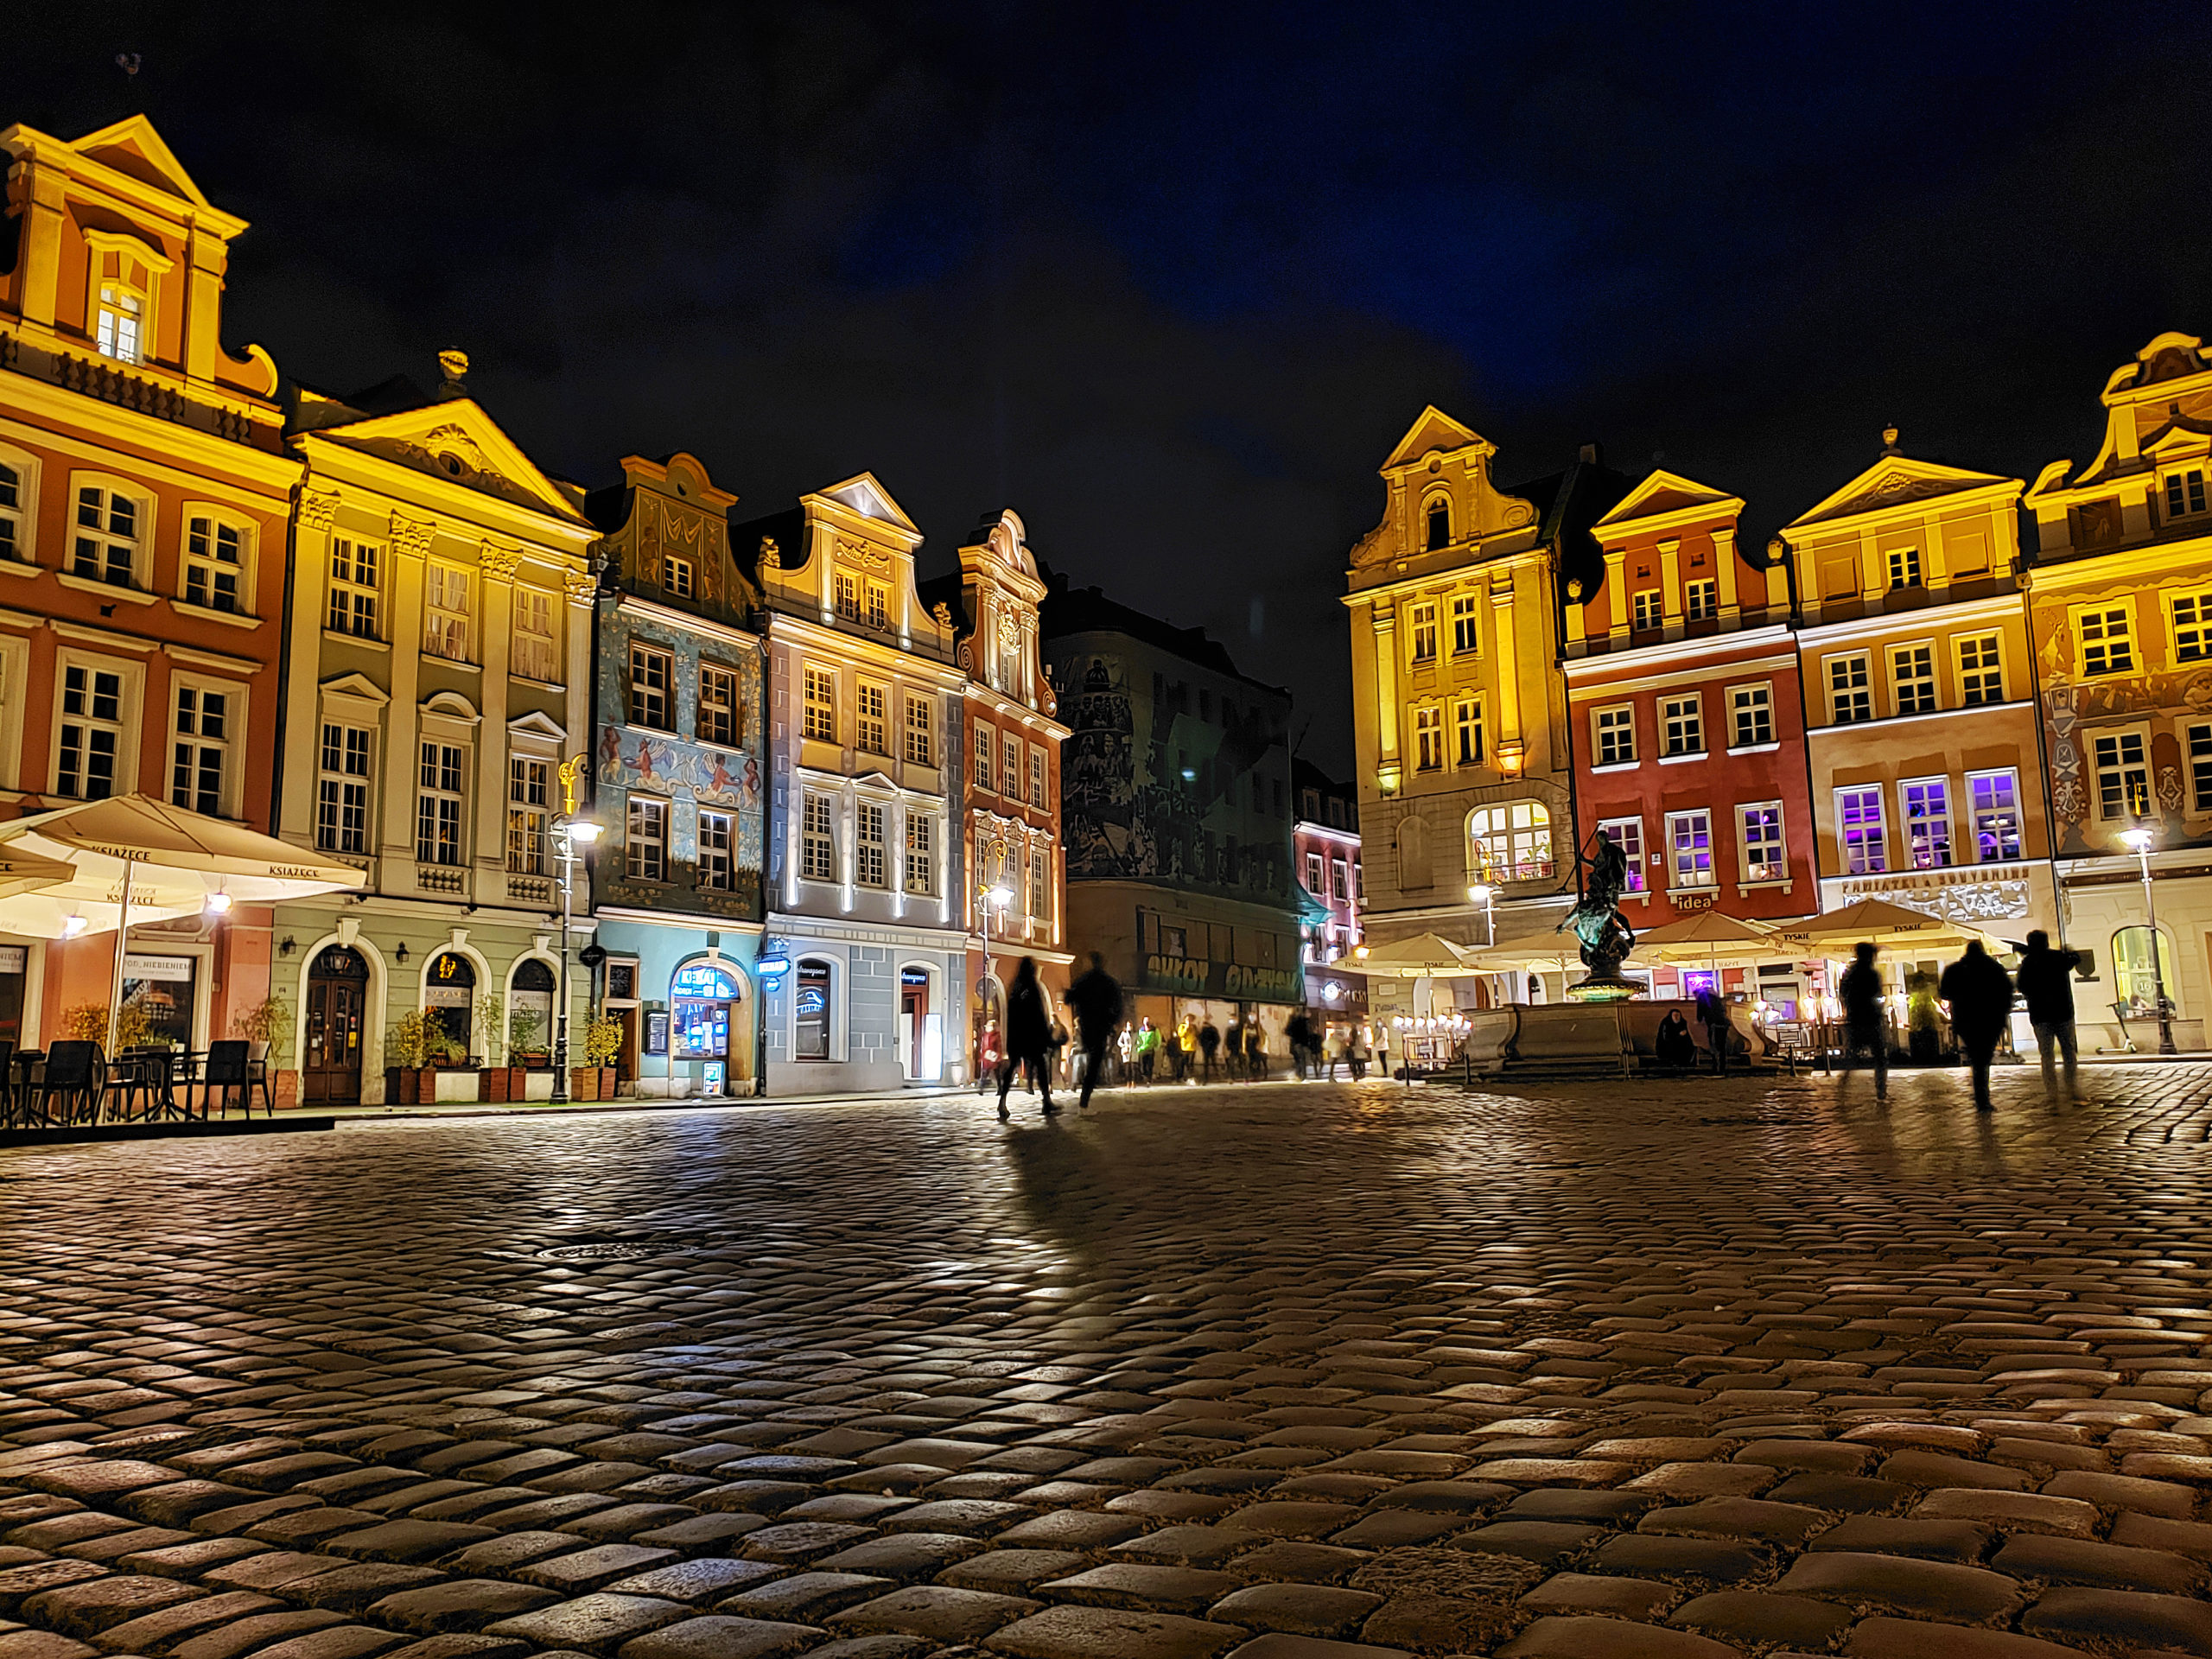 Top 11 Reasons Why Poland Should Be Your Next Travel Destination